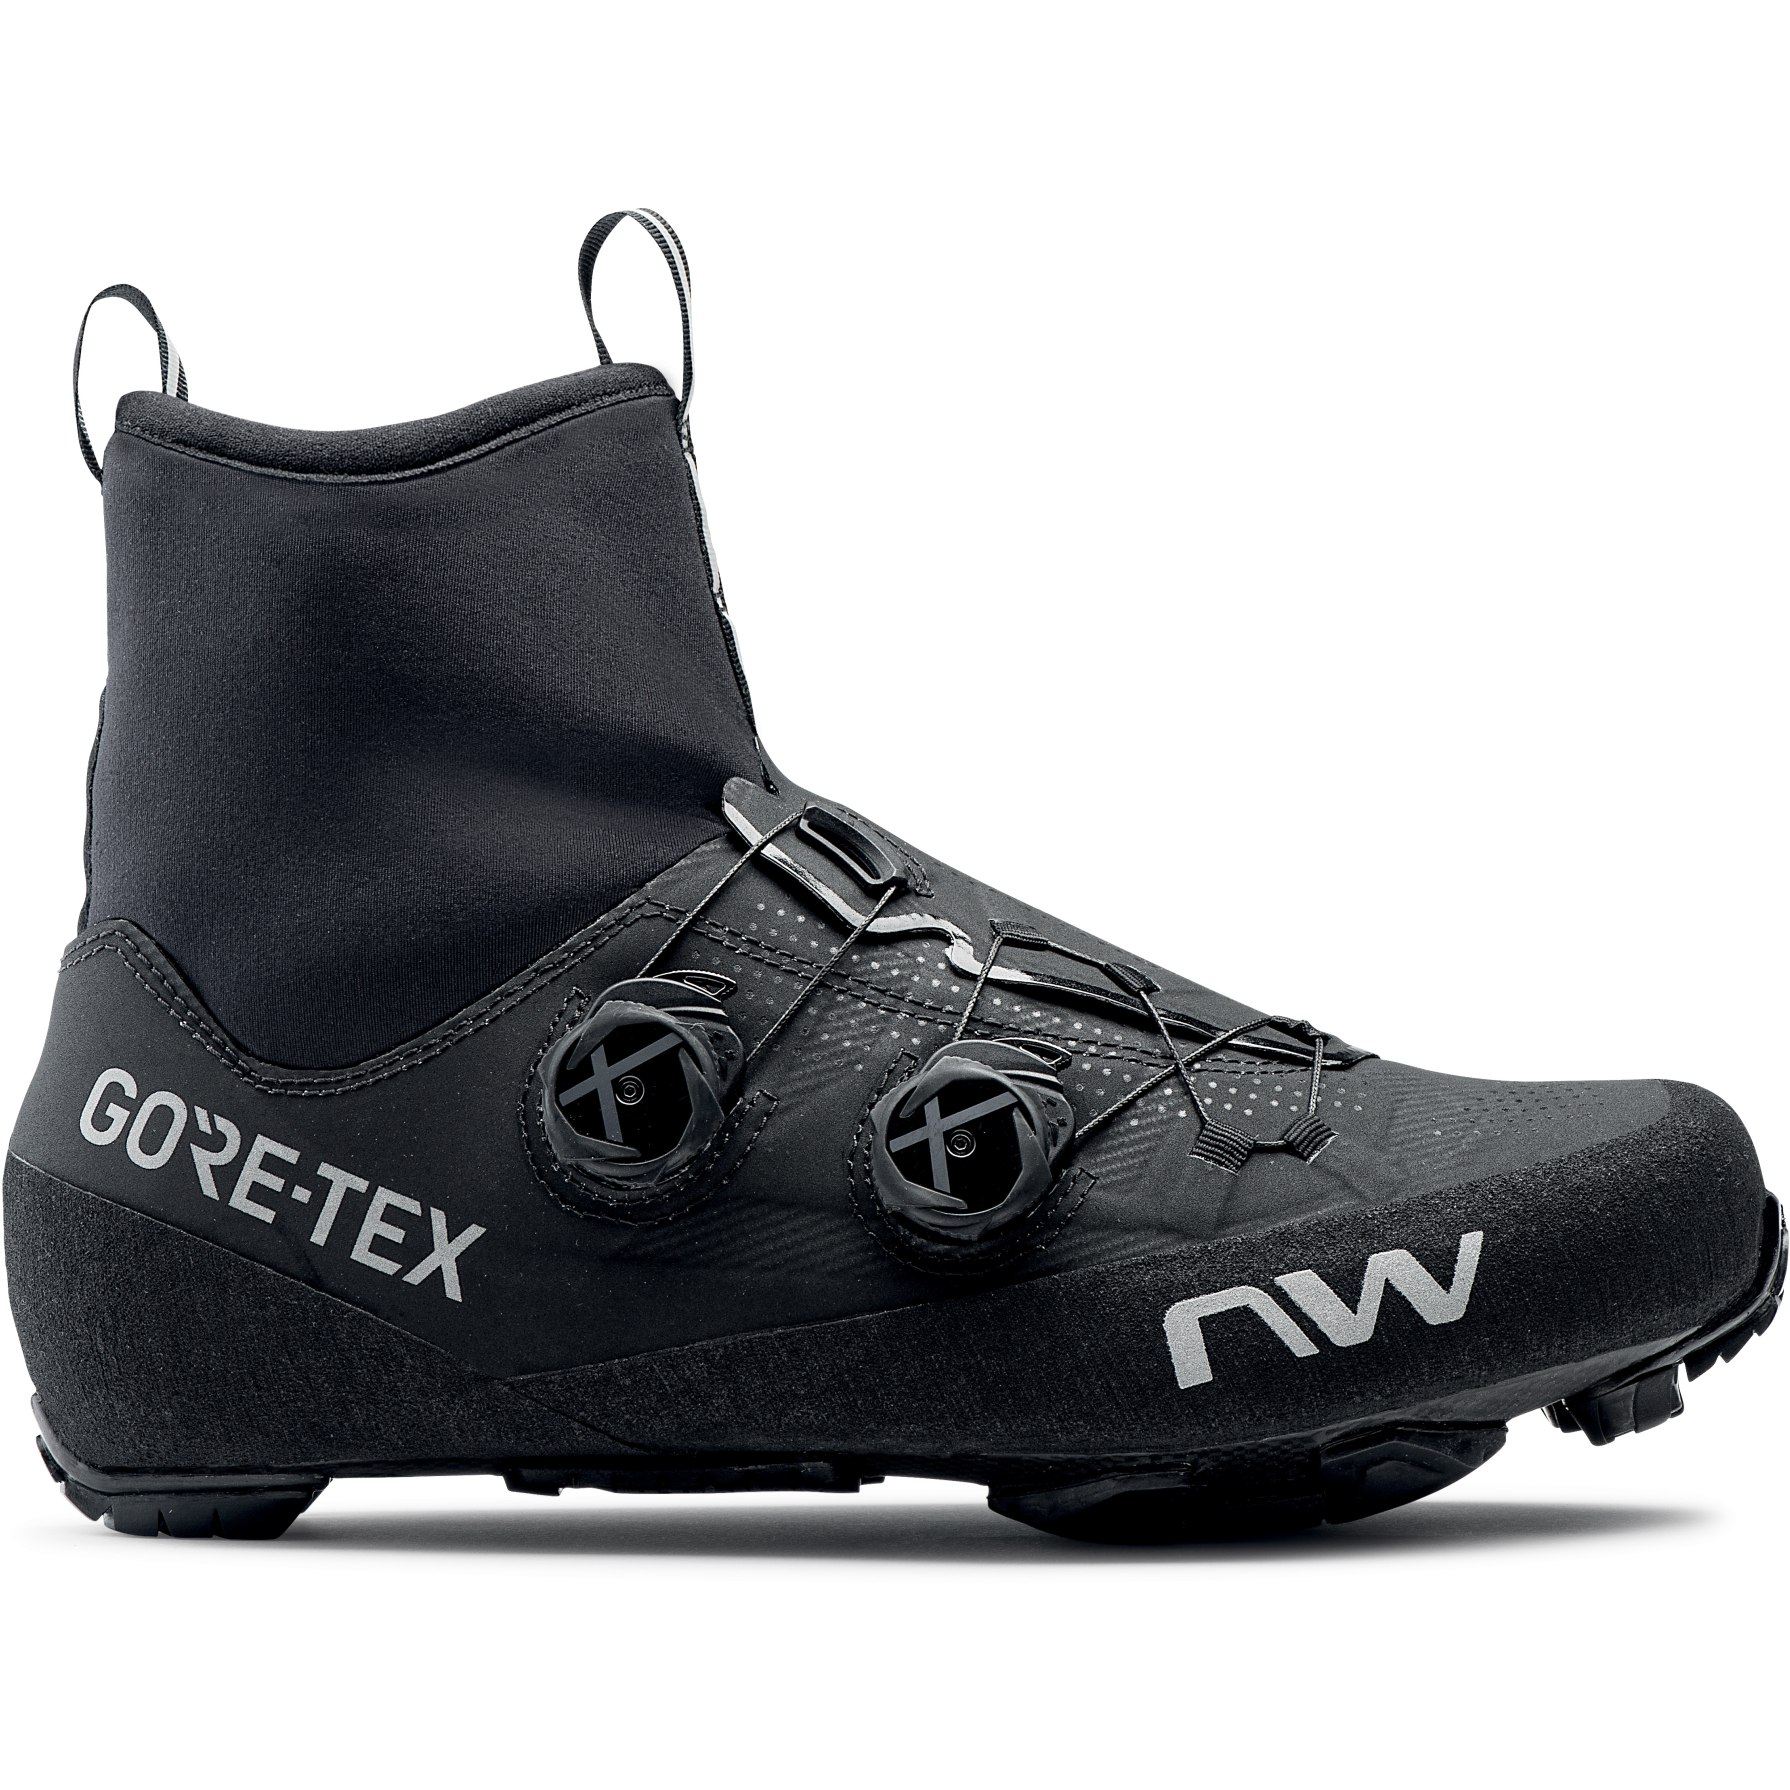 Picture of Northwave Flagship GTX MTB Bike Shoes - black 10